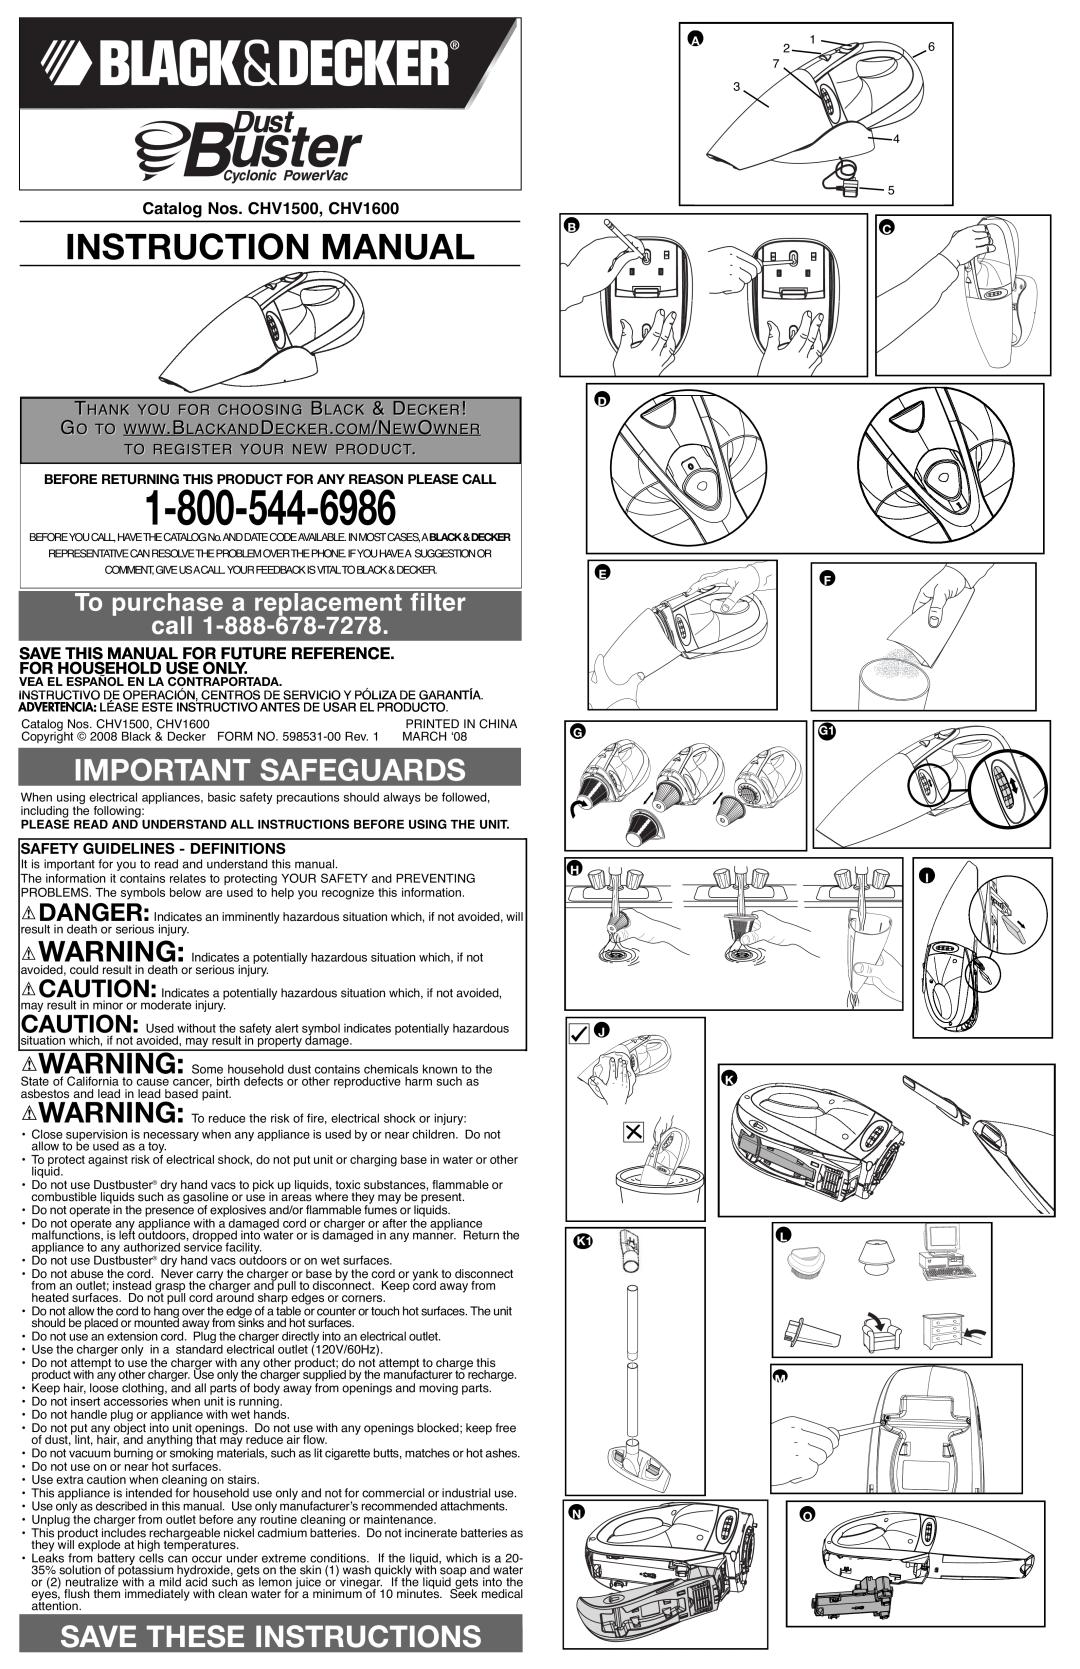 Black & Decker 598531-00, CHV1600 instruction manual Instruction Manual, Important Safeguards, Save These Instructions 